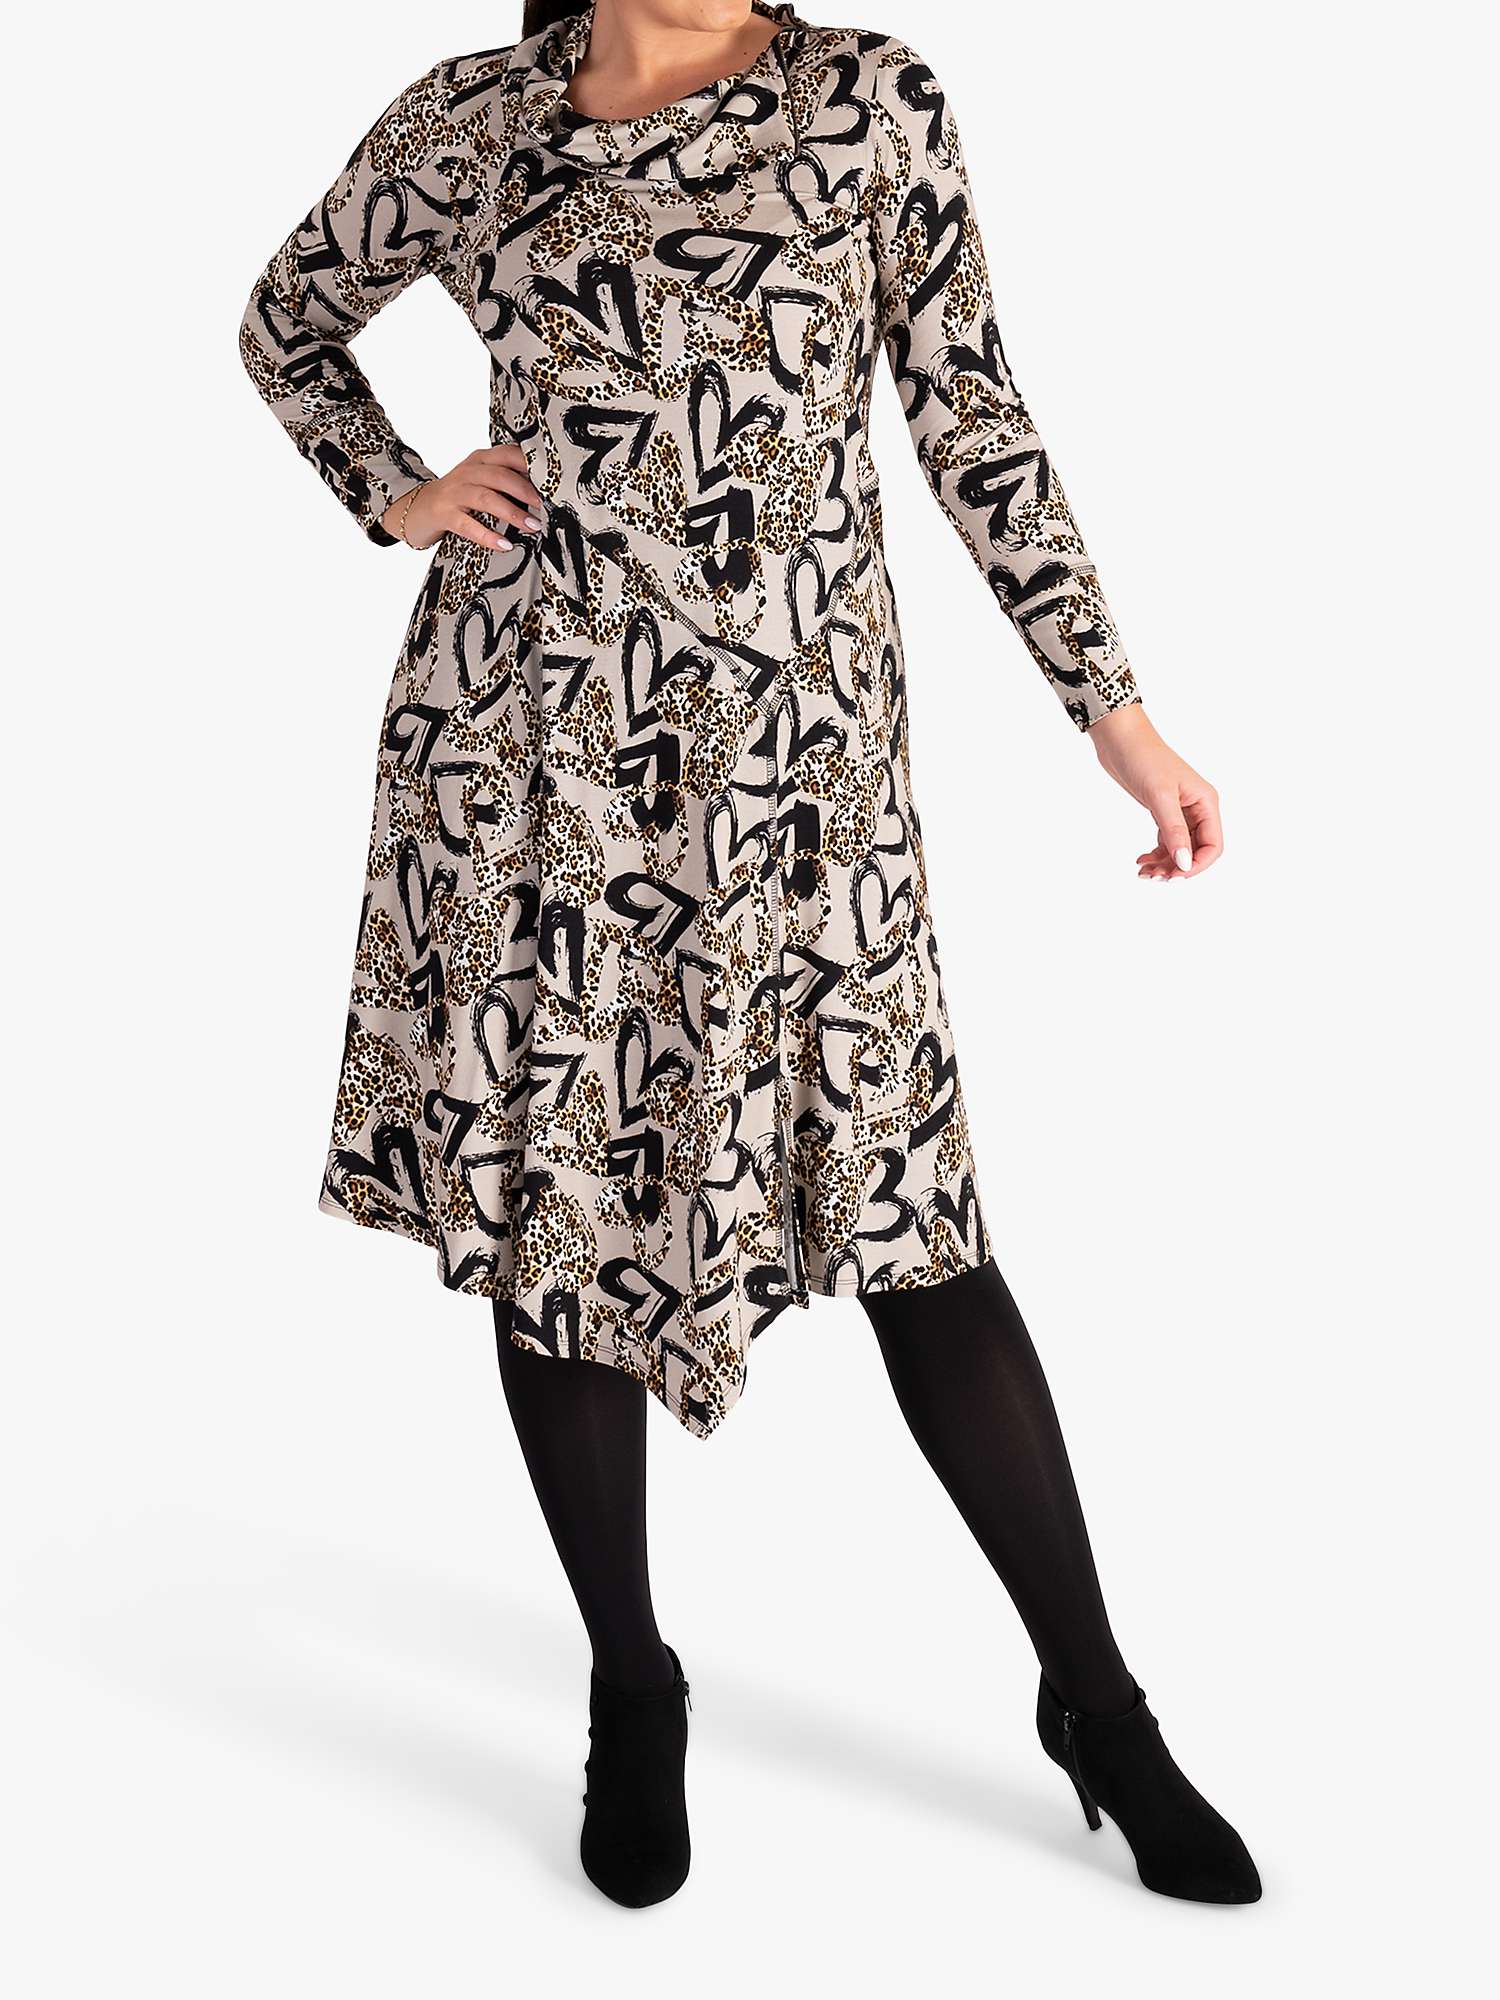 Buy chesca Heart Print Dress, Stone/Leopard Online at johnlewis.com